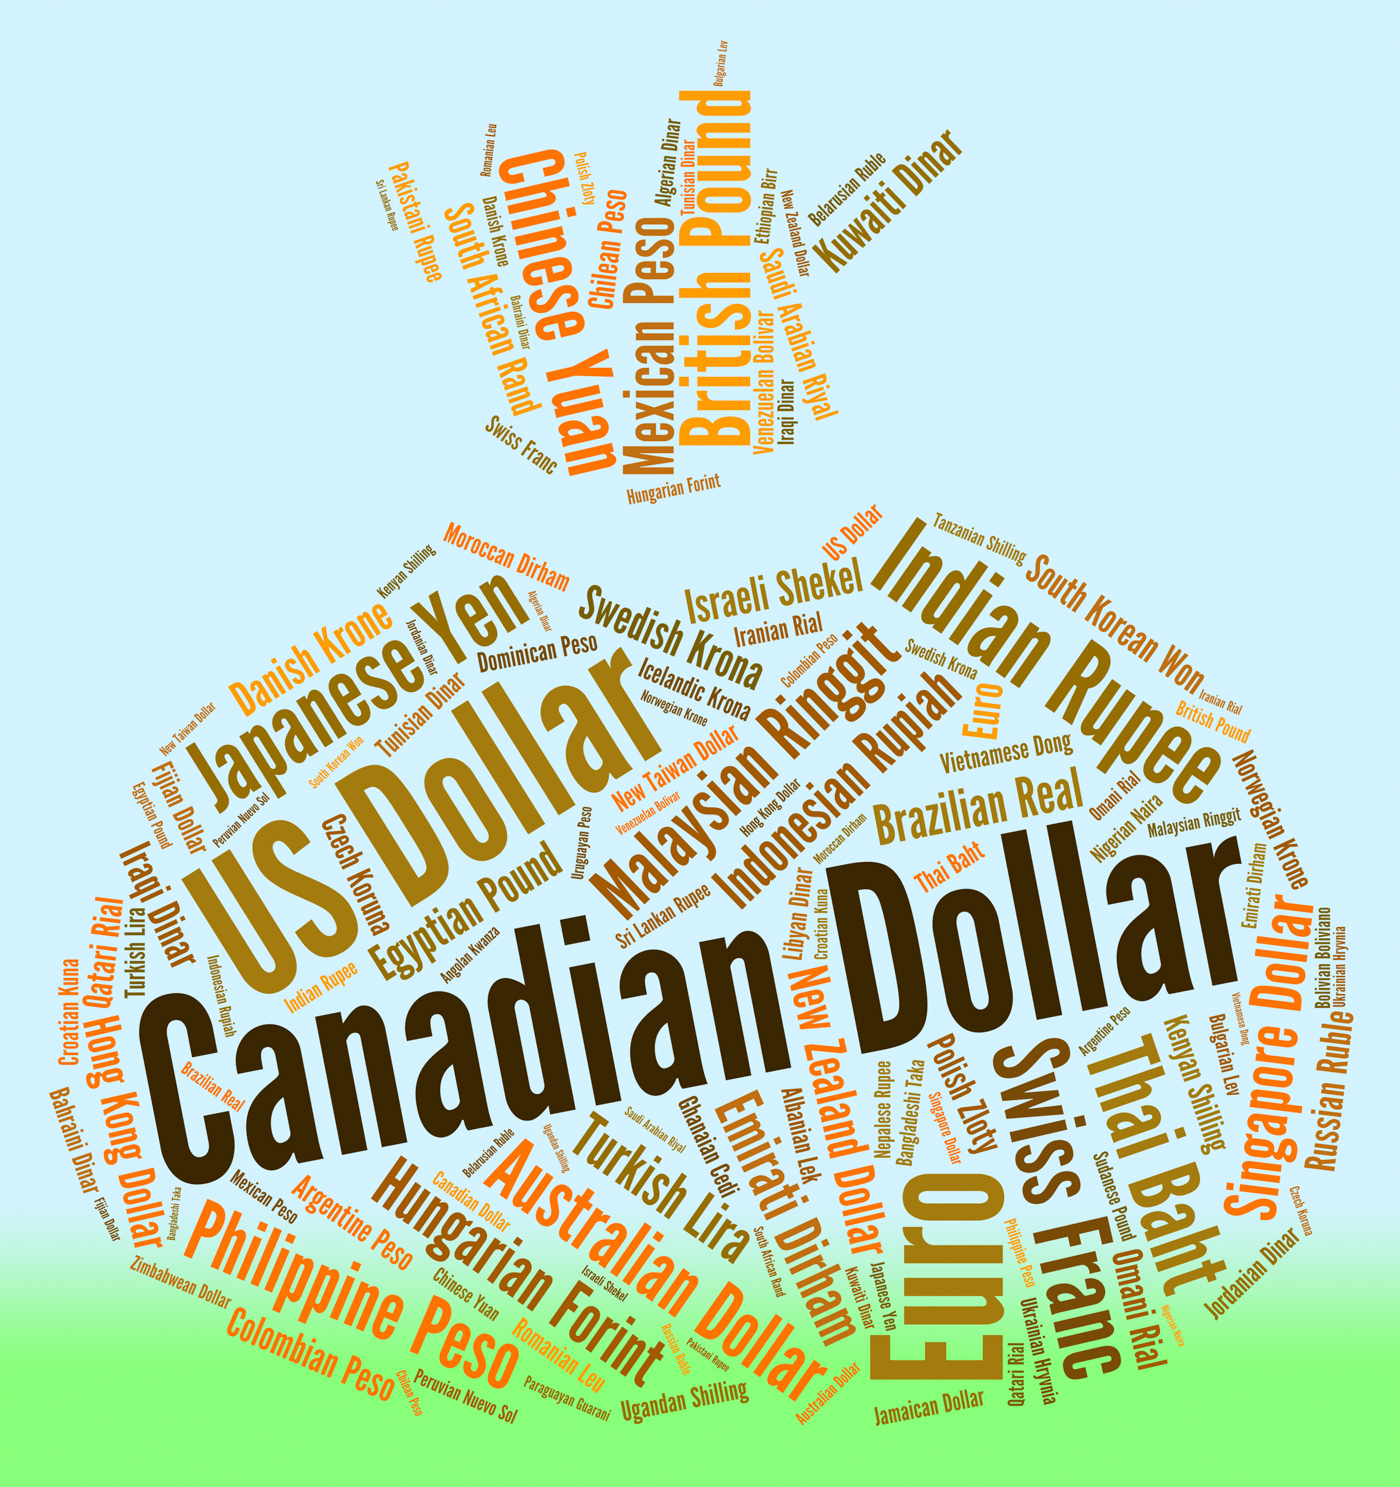 Canadian Dollar Shows Canada Dollars And Currency, Banknote, Exchange, Words, Wordcloud, HQ Photo